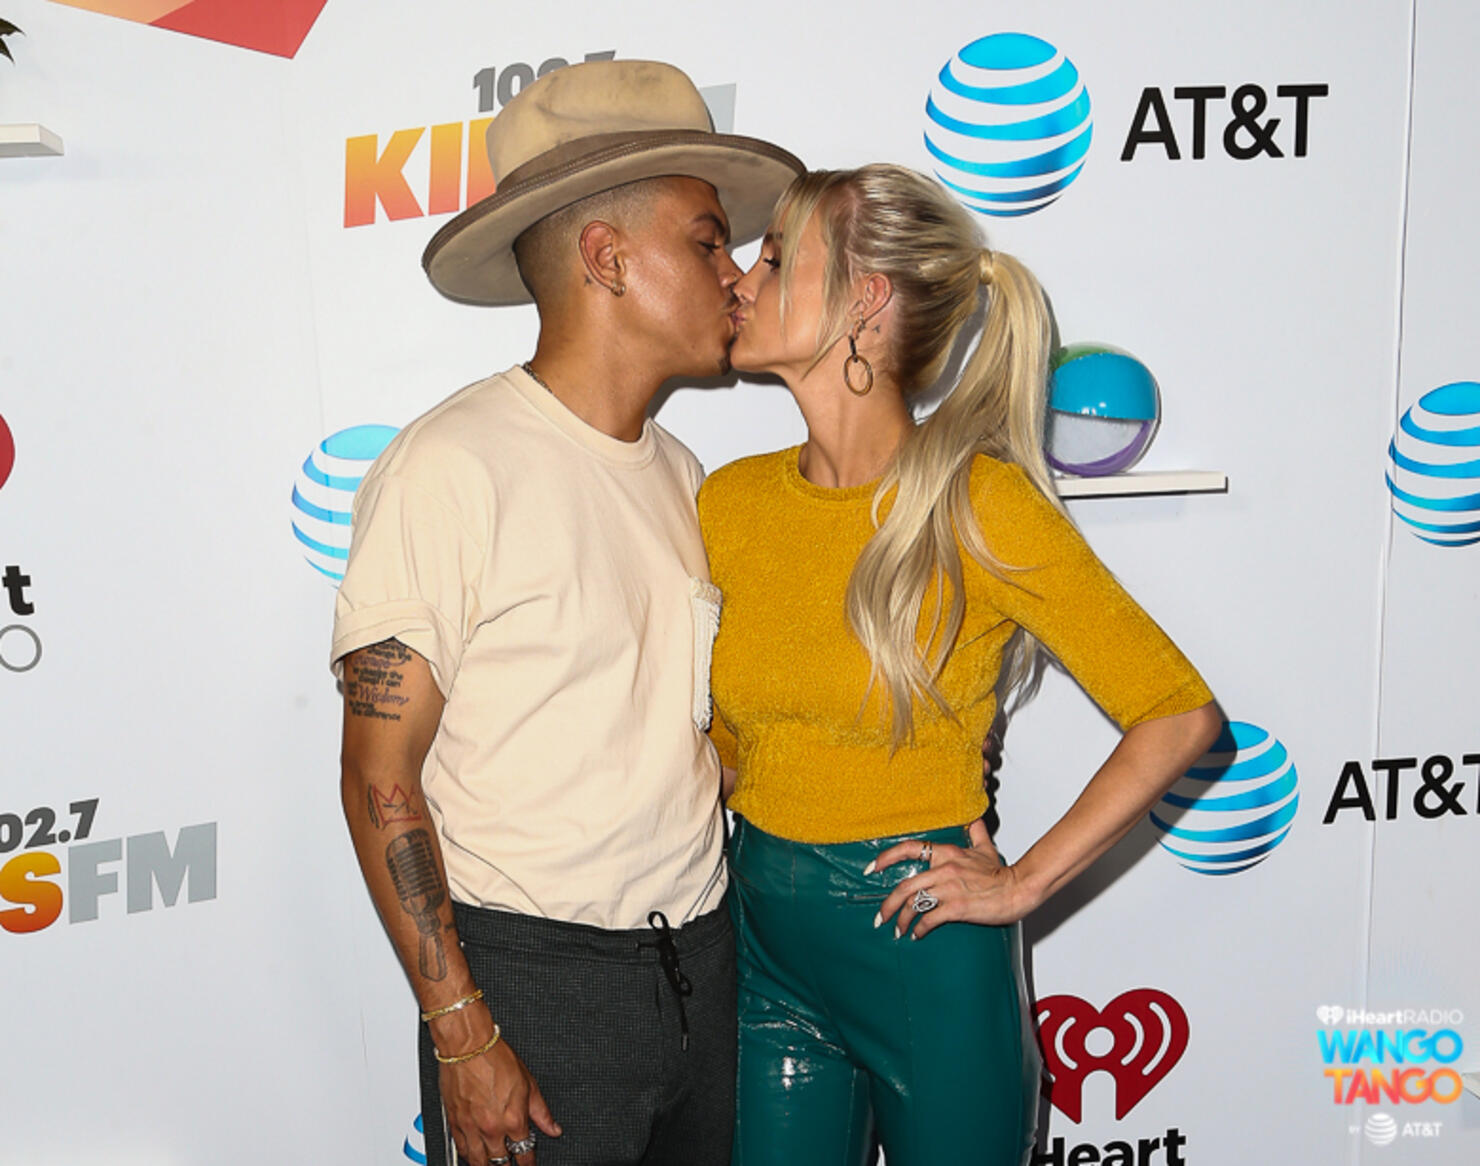  Evan Ross (L) and Ashlee Simpson arrive at the 2018 iHeartRadio Wango Tango by AT&T at Banc of California Stadium on June 2, 2018 in Los Angeles, California.